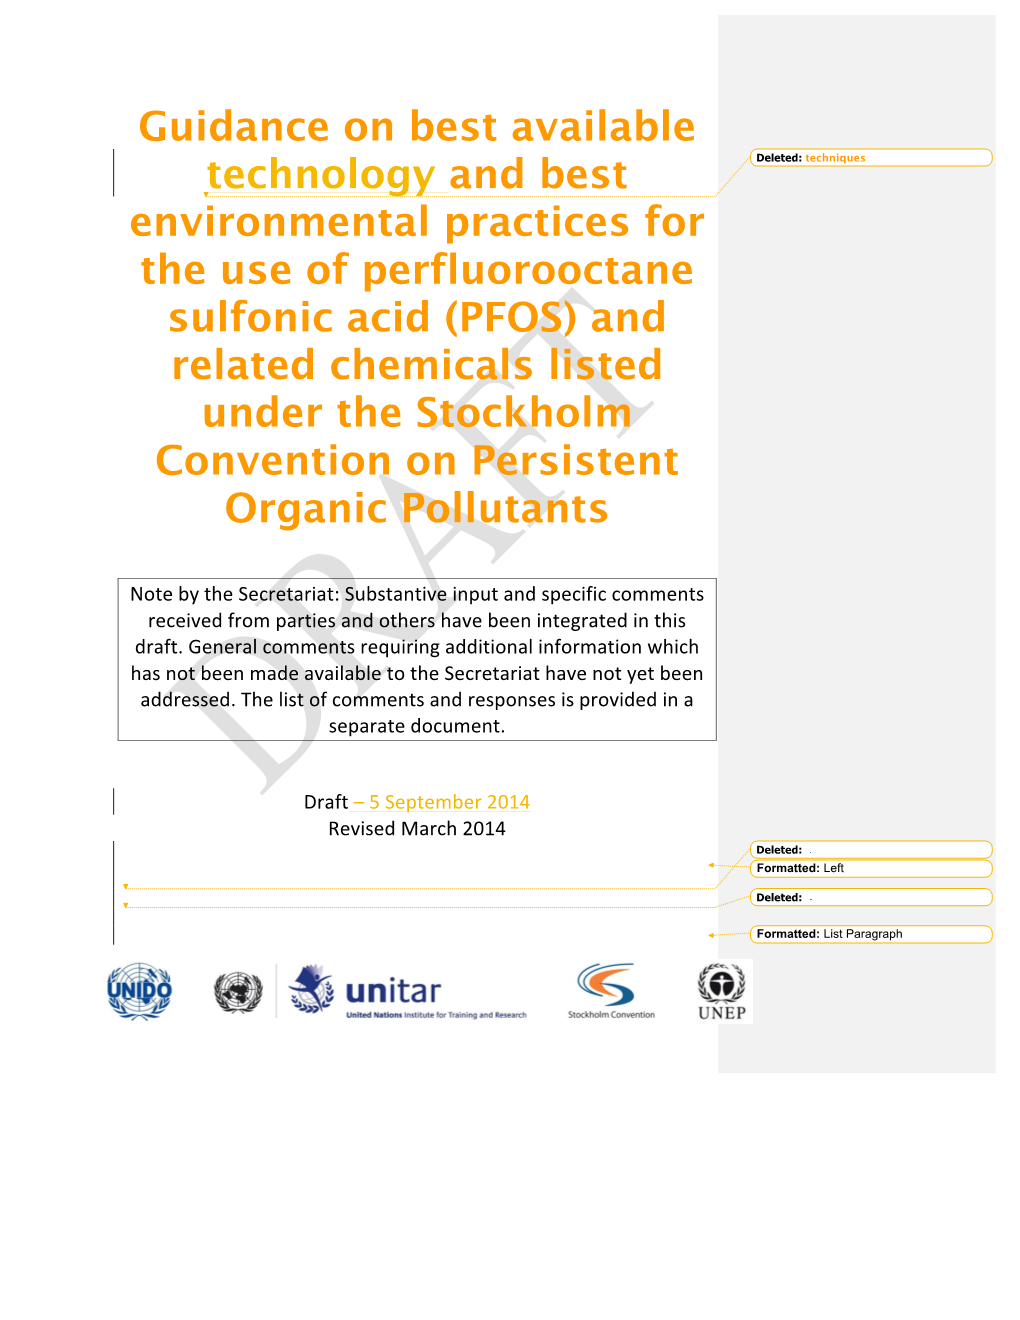 PFOS) and Related Chemicals Listed Under the Stockholm Convention on Persistent Organic Pollutants